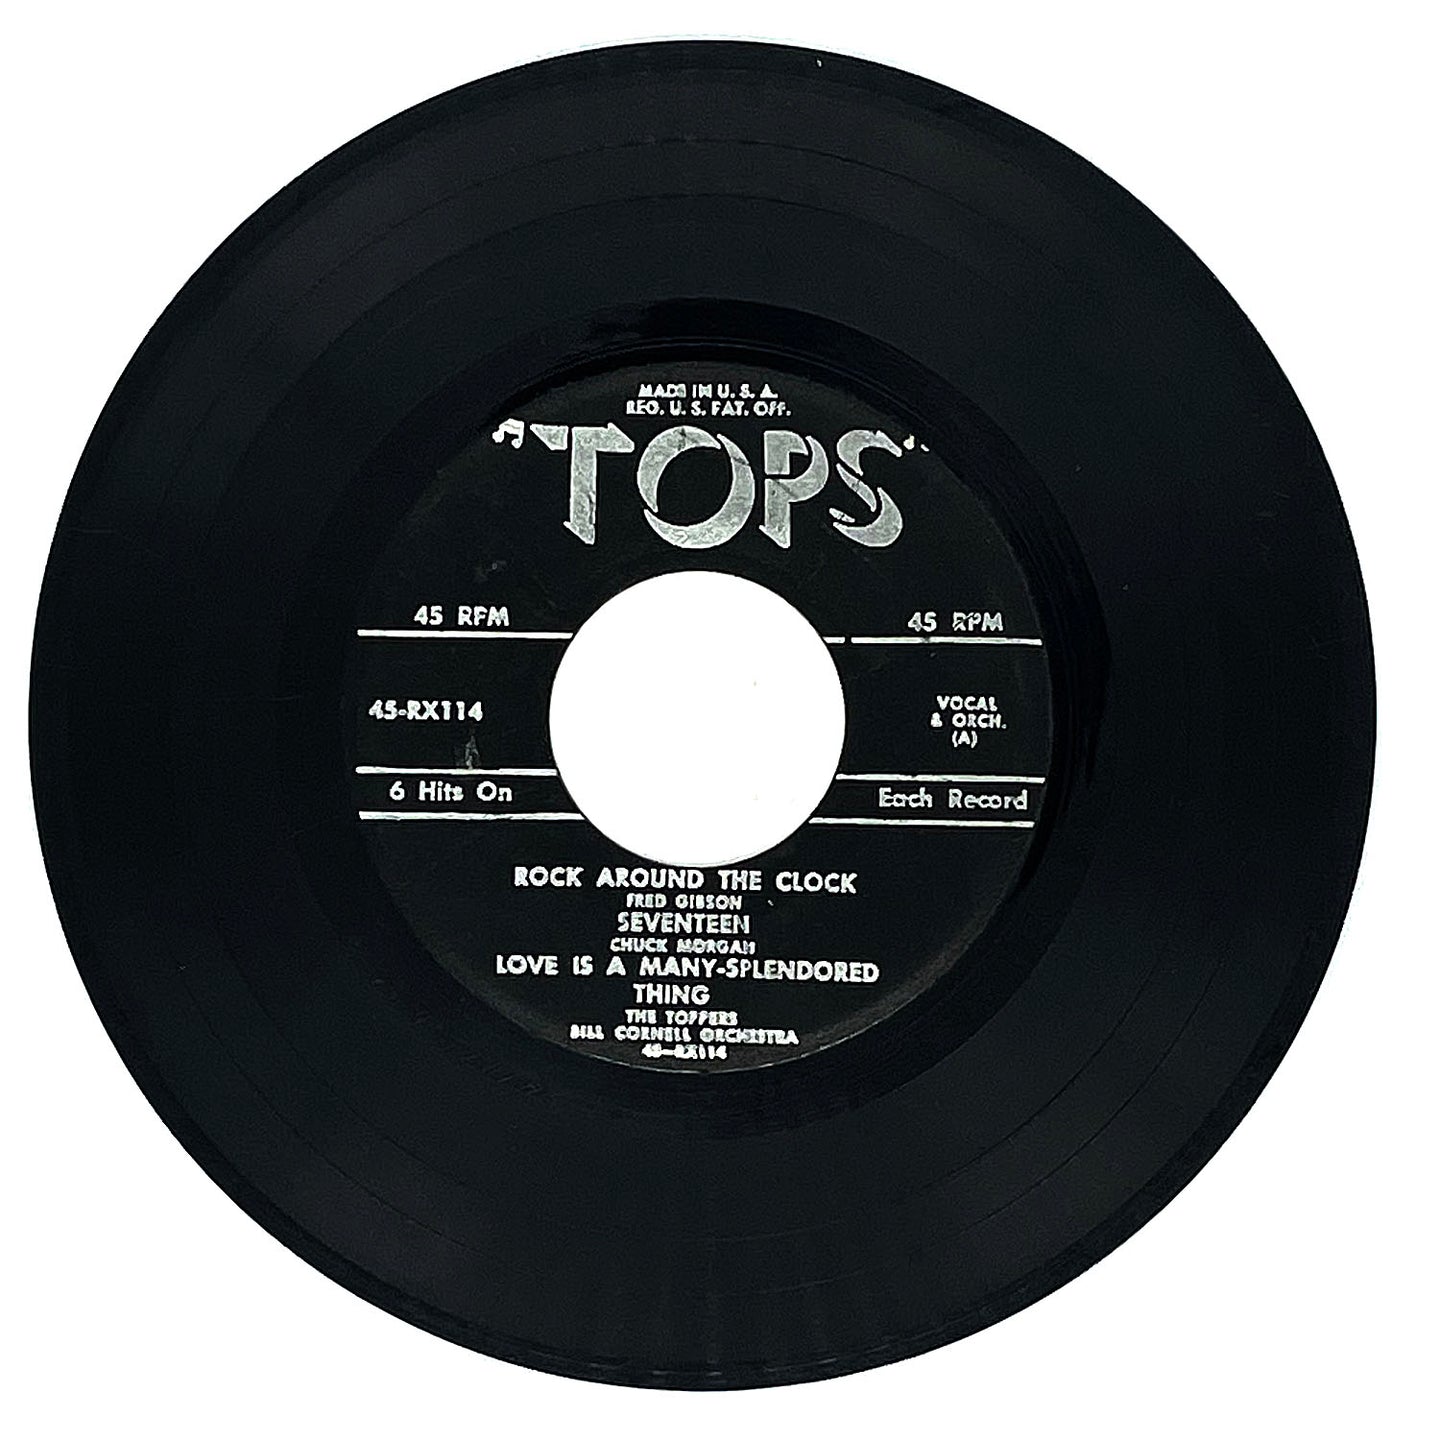 Fred Gibson : ROCK AROUND THE CLOCK/ Chuck Morgan : SEVENTEEN/ The Toppers : LOVE IS A MANY-SPLENDORED THING/ Tony Benson & The Toppers : AIN'T THAT A SHAME/ The Toppers : YELLOW ROSE OF TEXAS/ WAKE THE TOWN